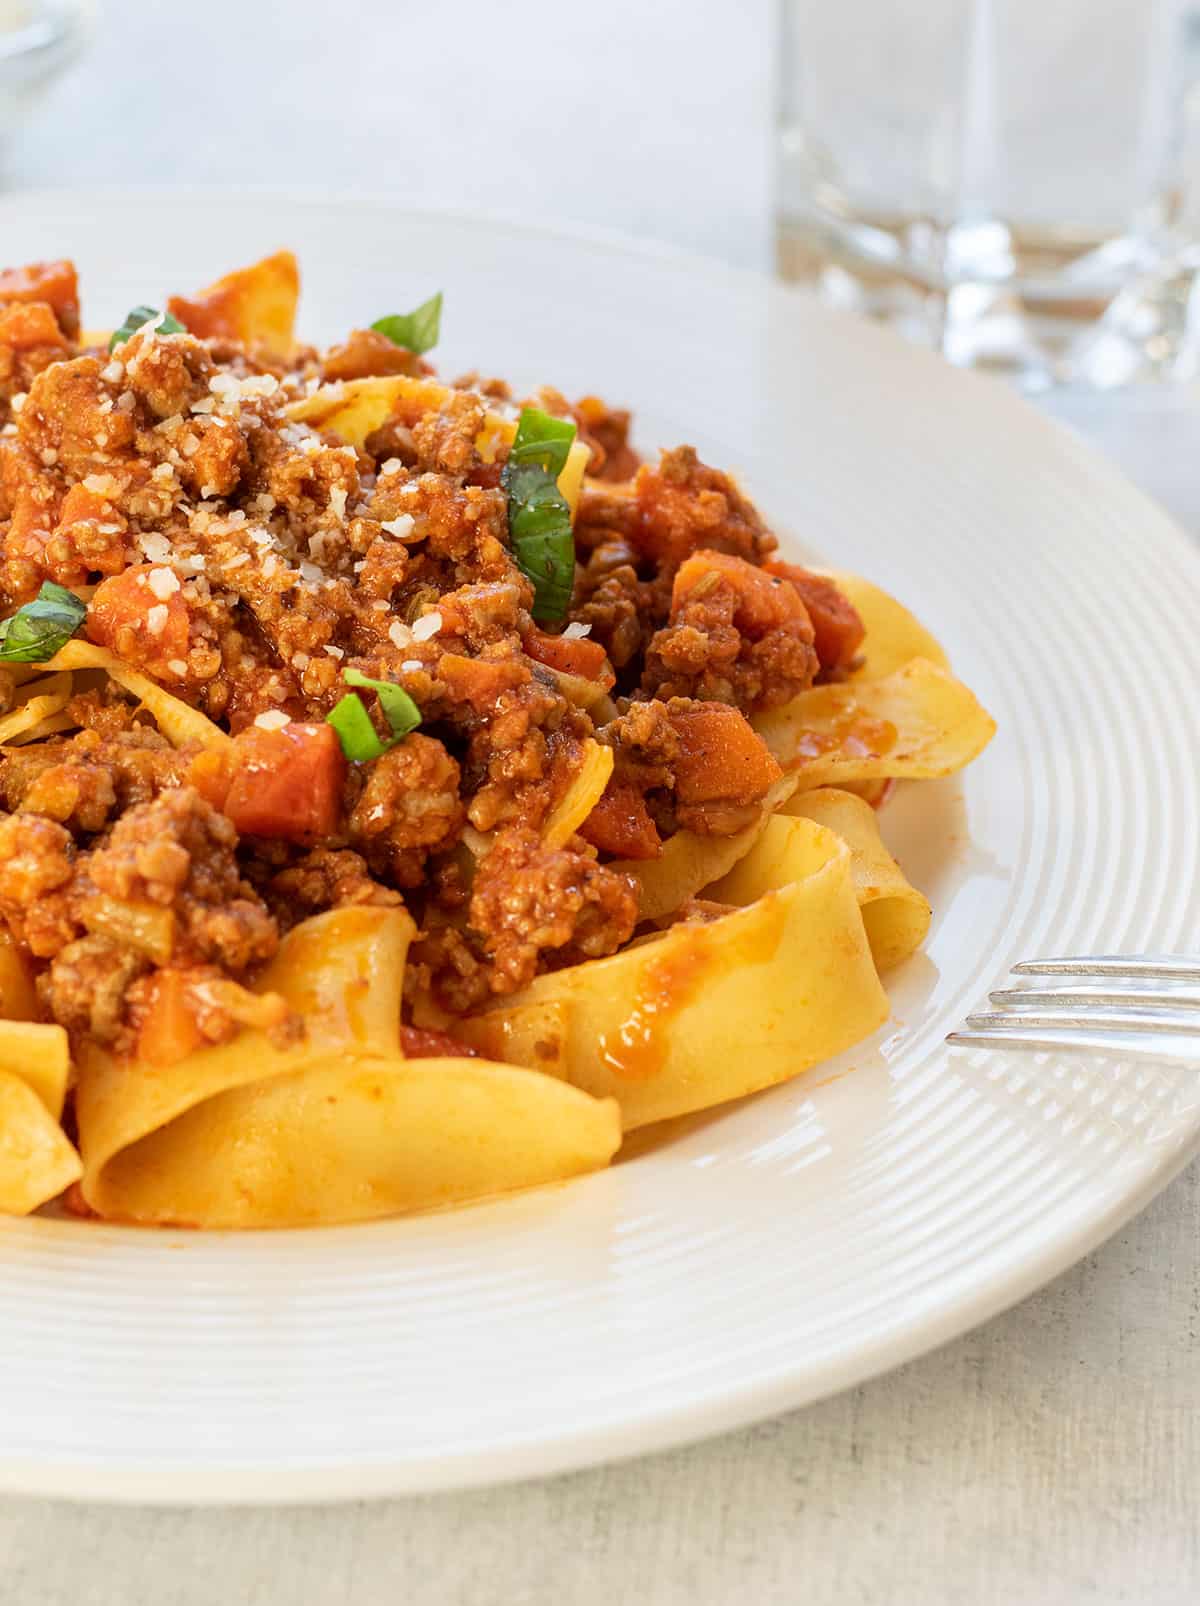 plate of beef bolognese over pasta garnished with basil